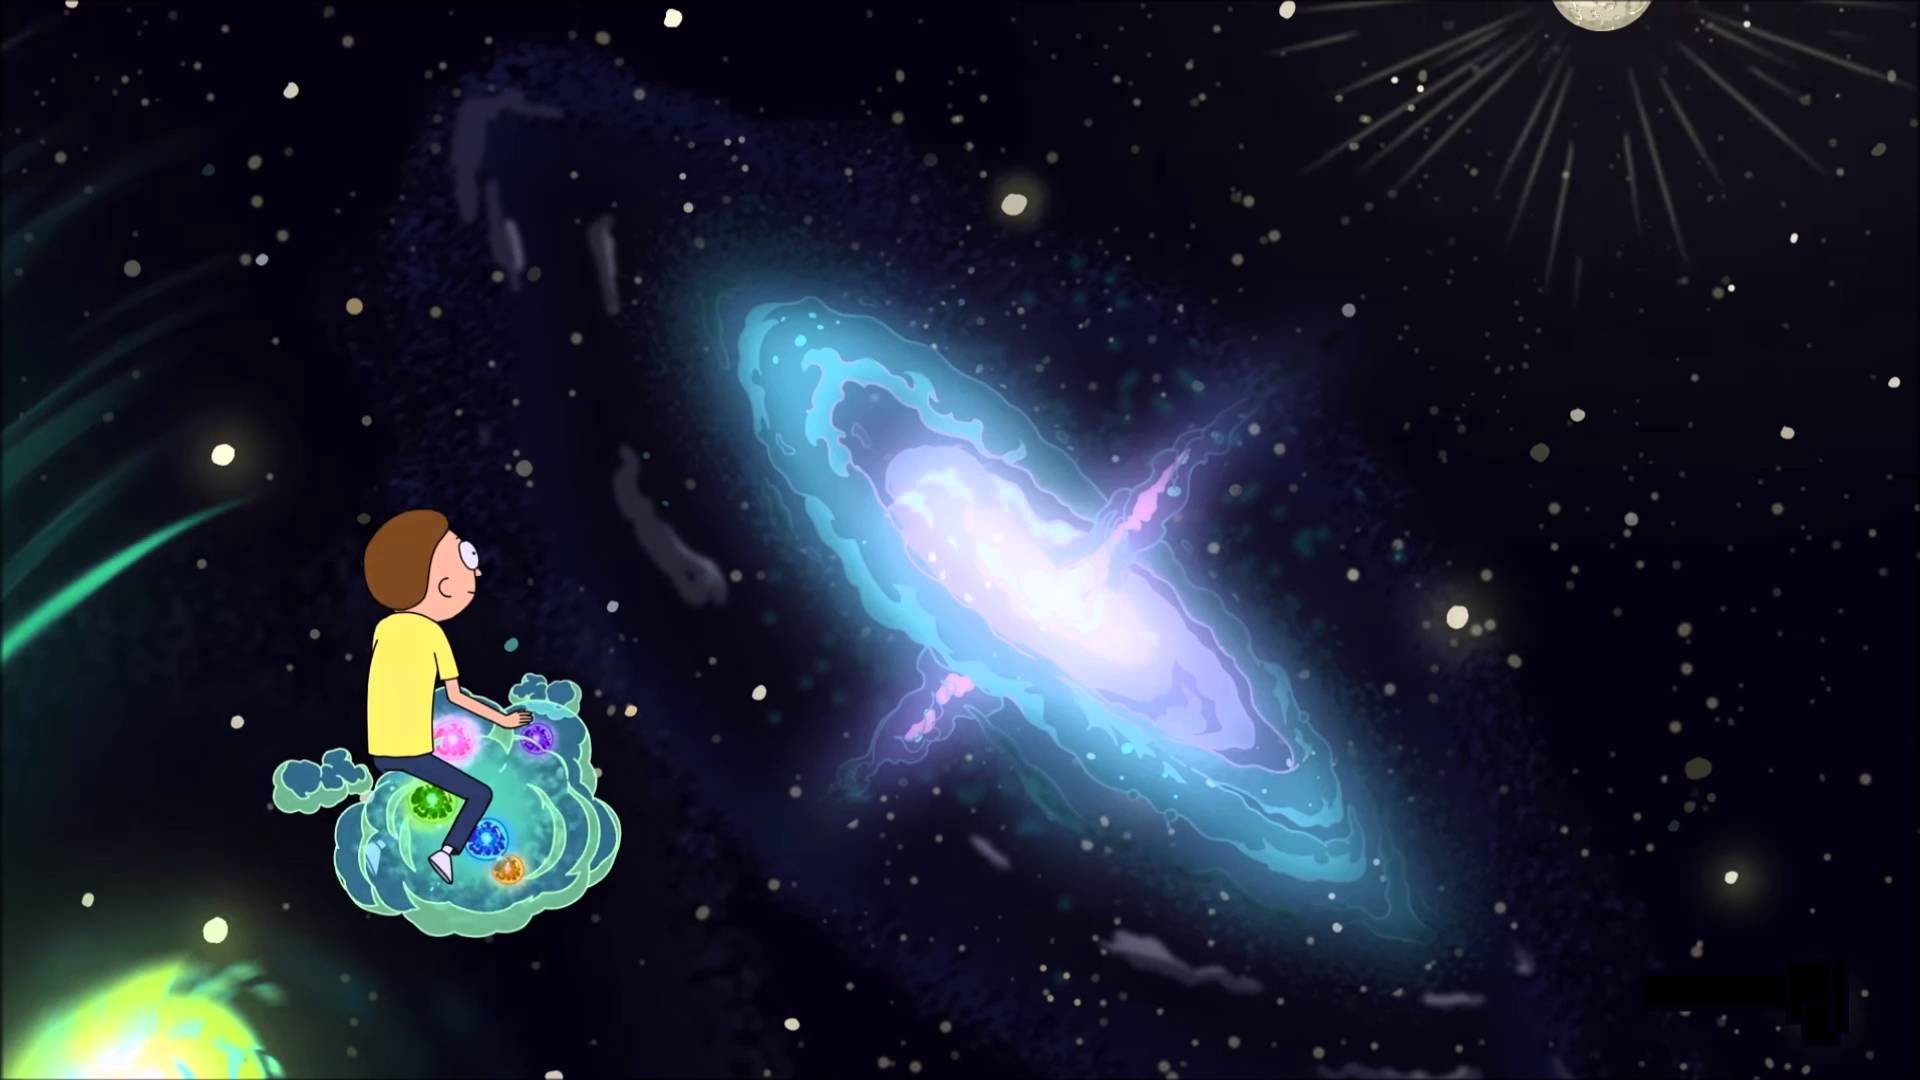 Cartoon Network Rick and Morty Desktop Backgrounds HD with resolution 1920X1080 pixel. You can use this wallpaper as background for your desktop Computer Screensavers, Android or iPhone smartphones